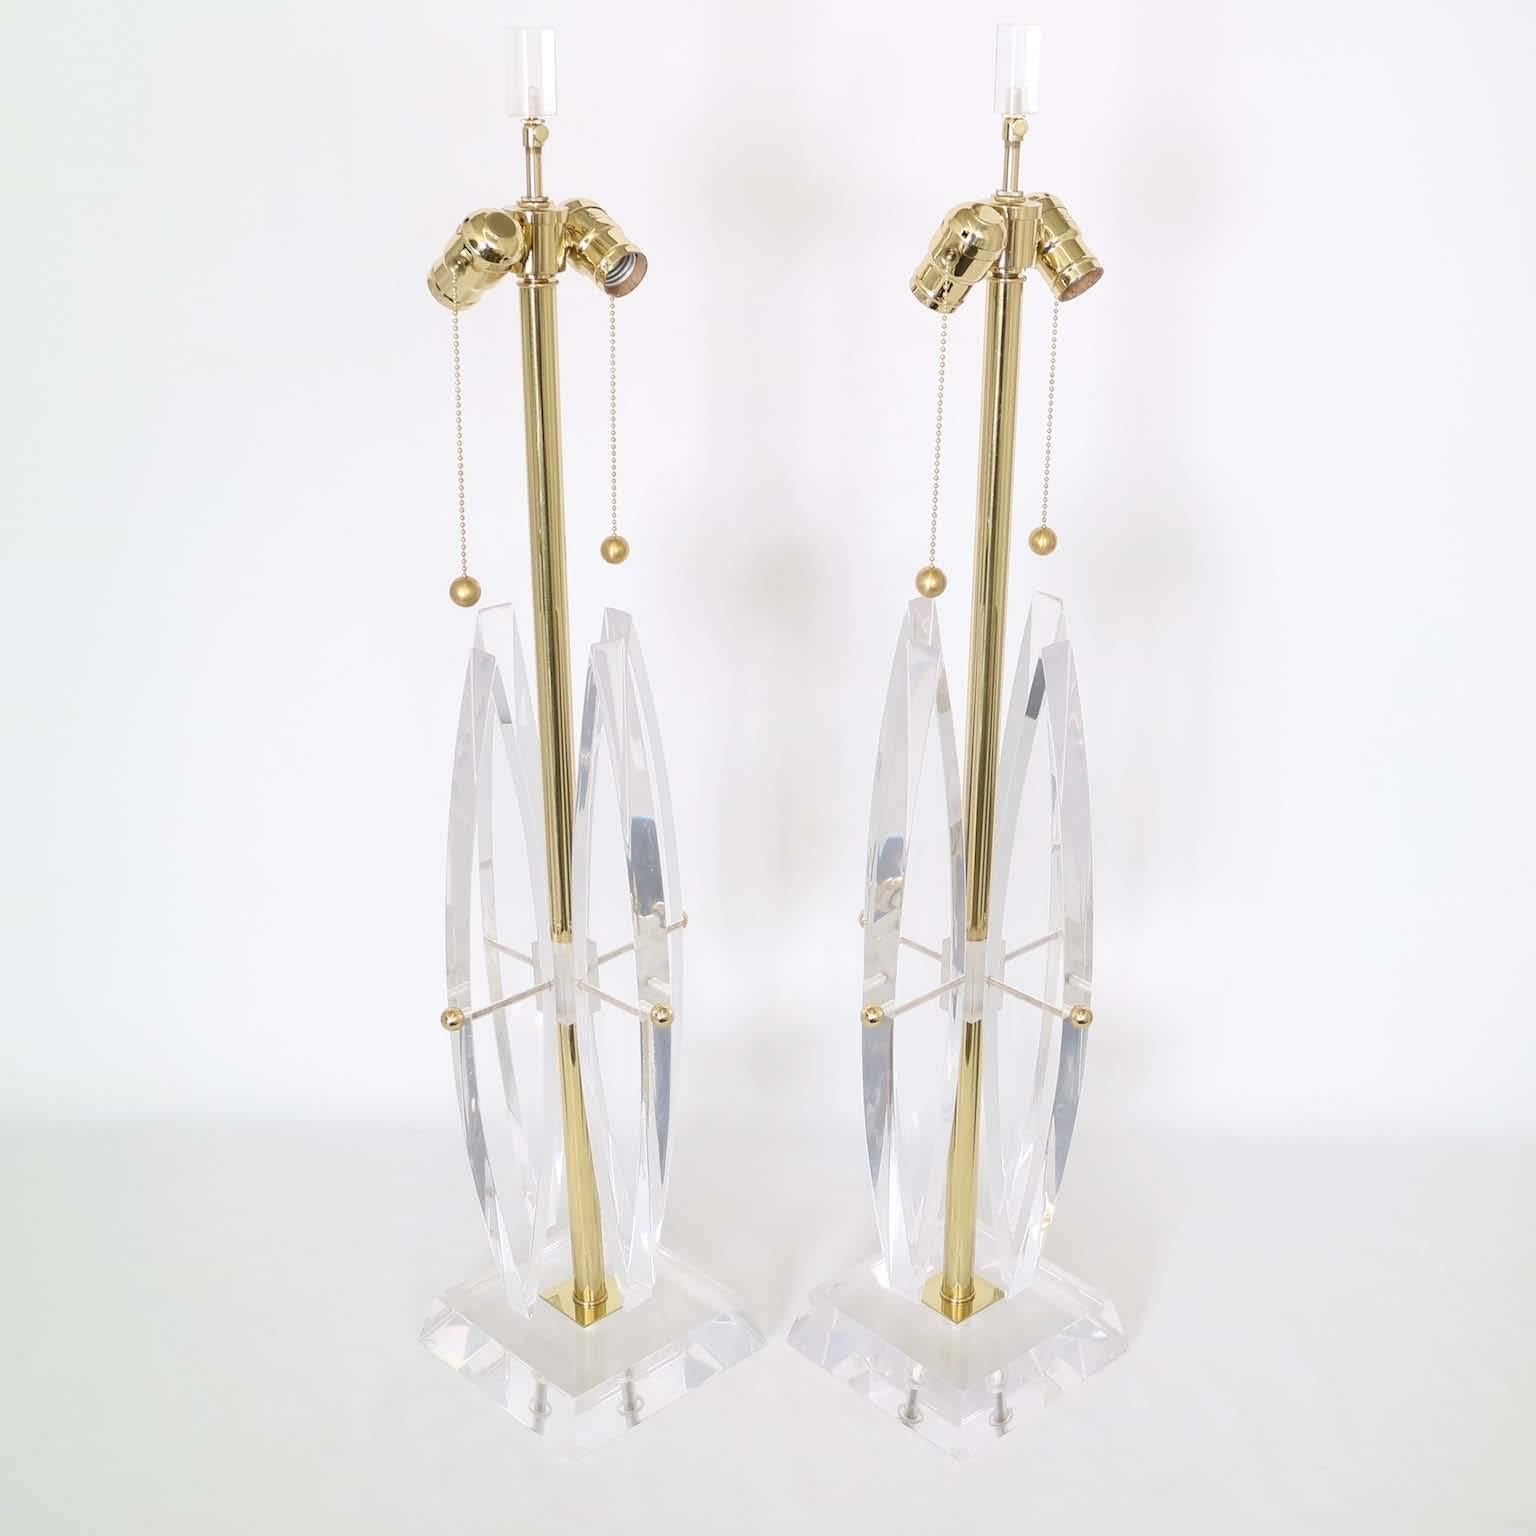 Brass Pair of Restored Ritts Astrolite Lucite Lamps